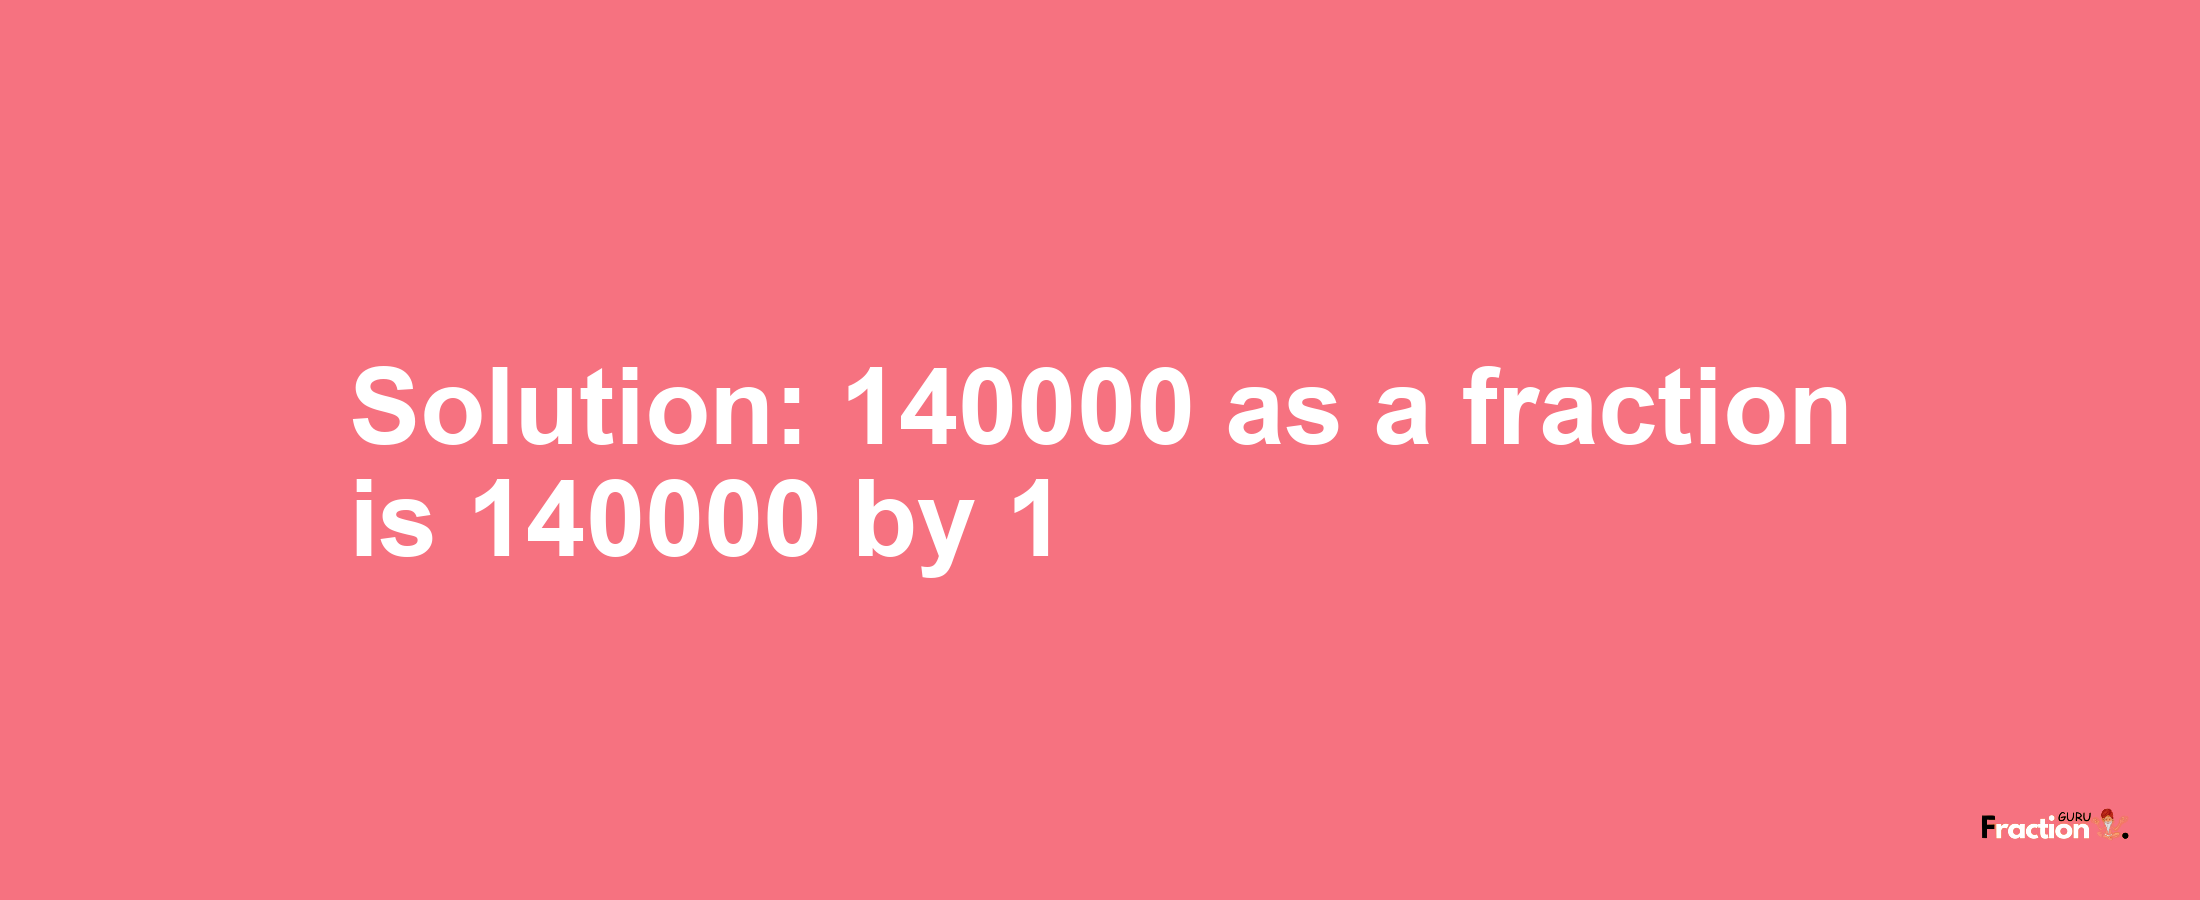 Solution:140000 as a fraction is 140000/1